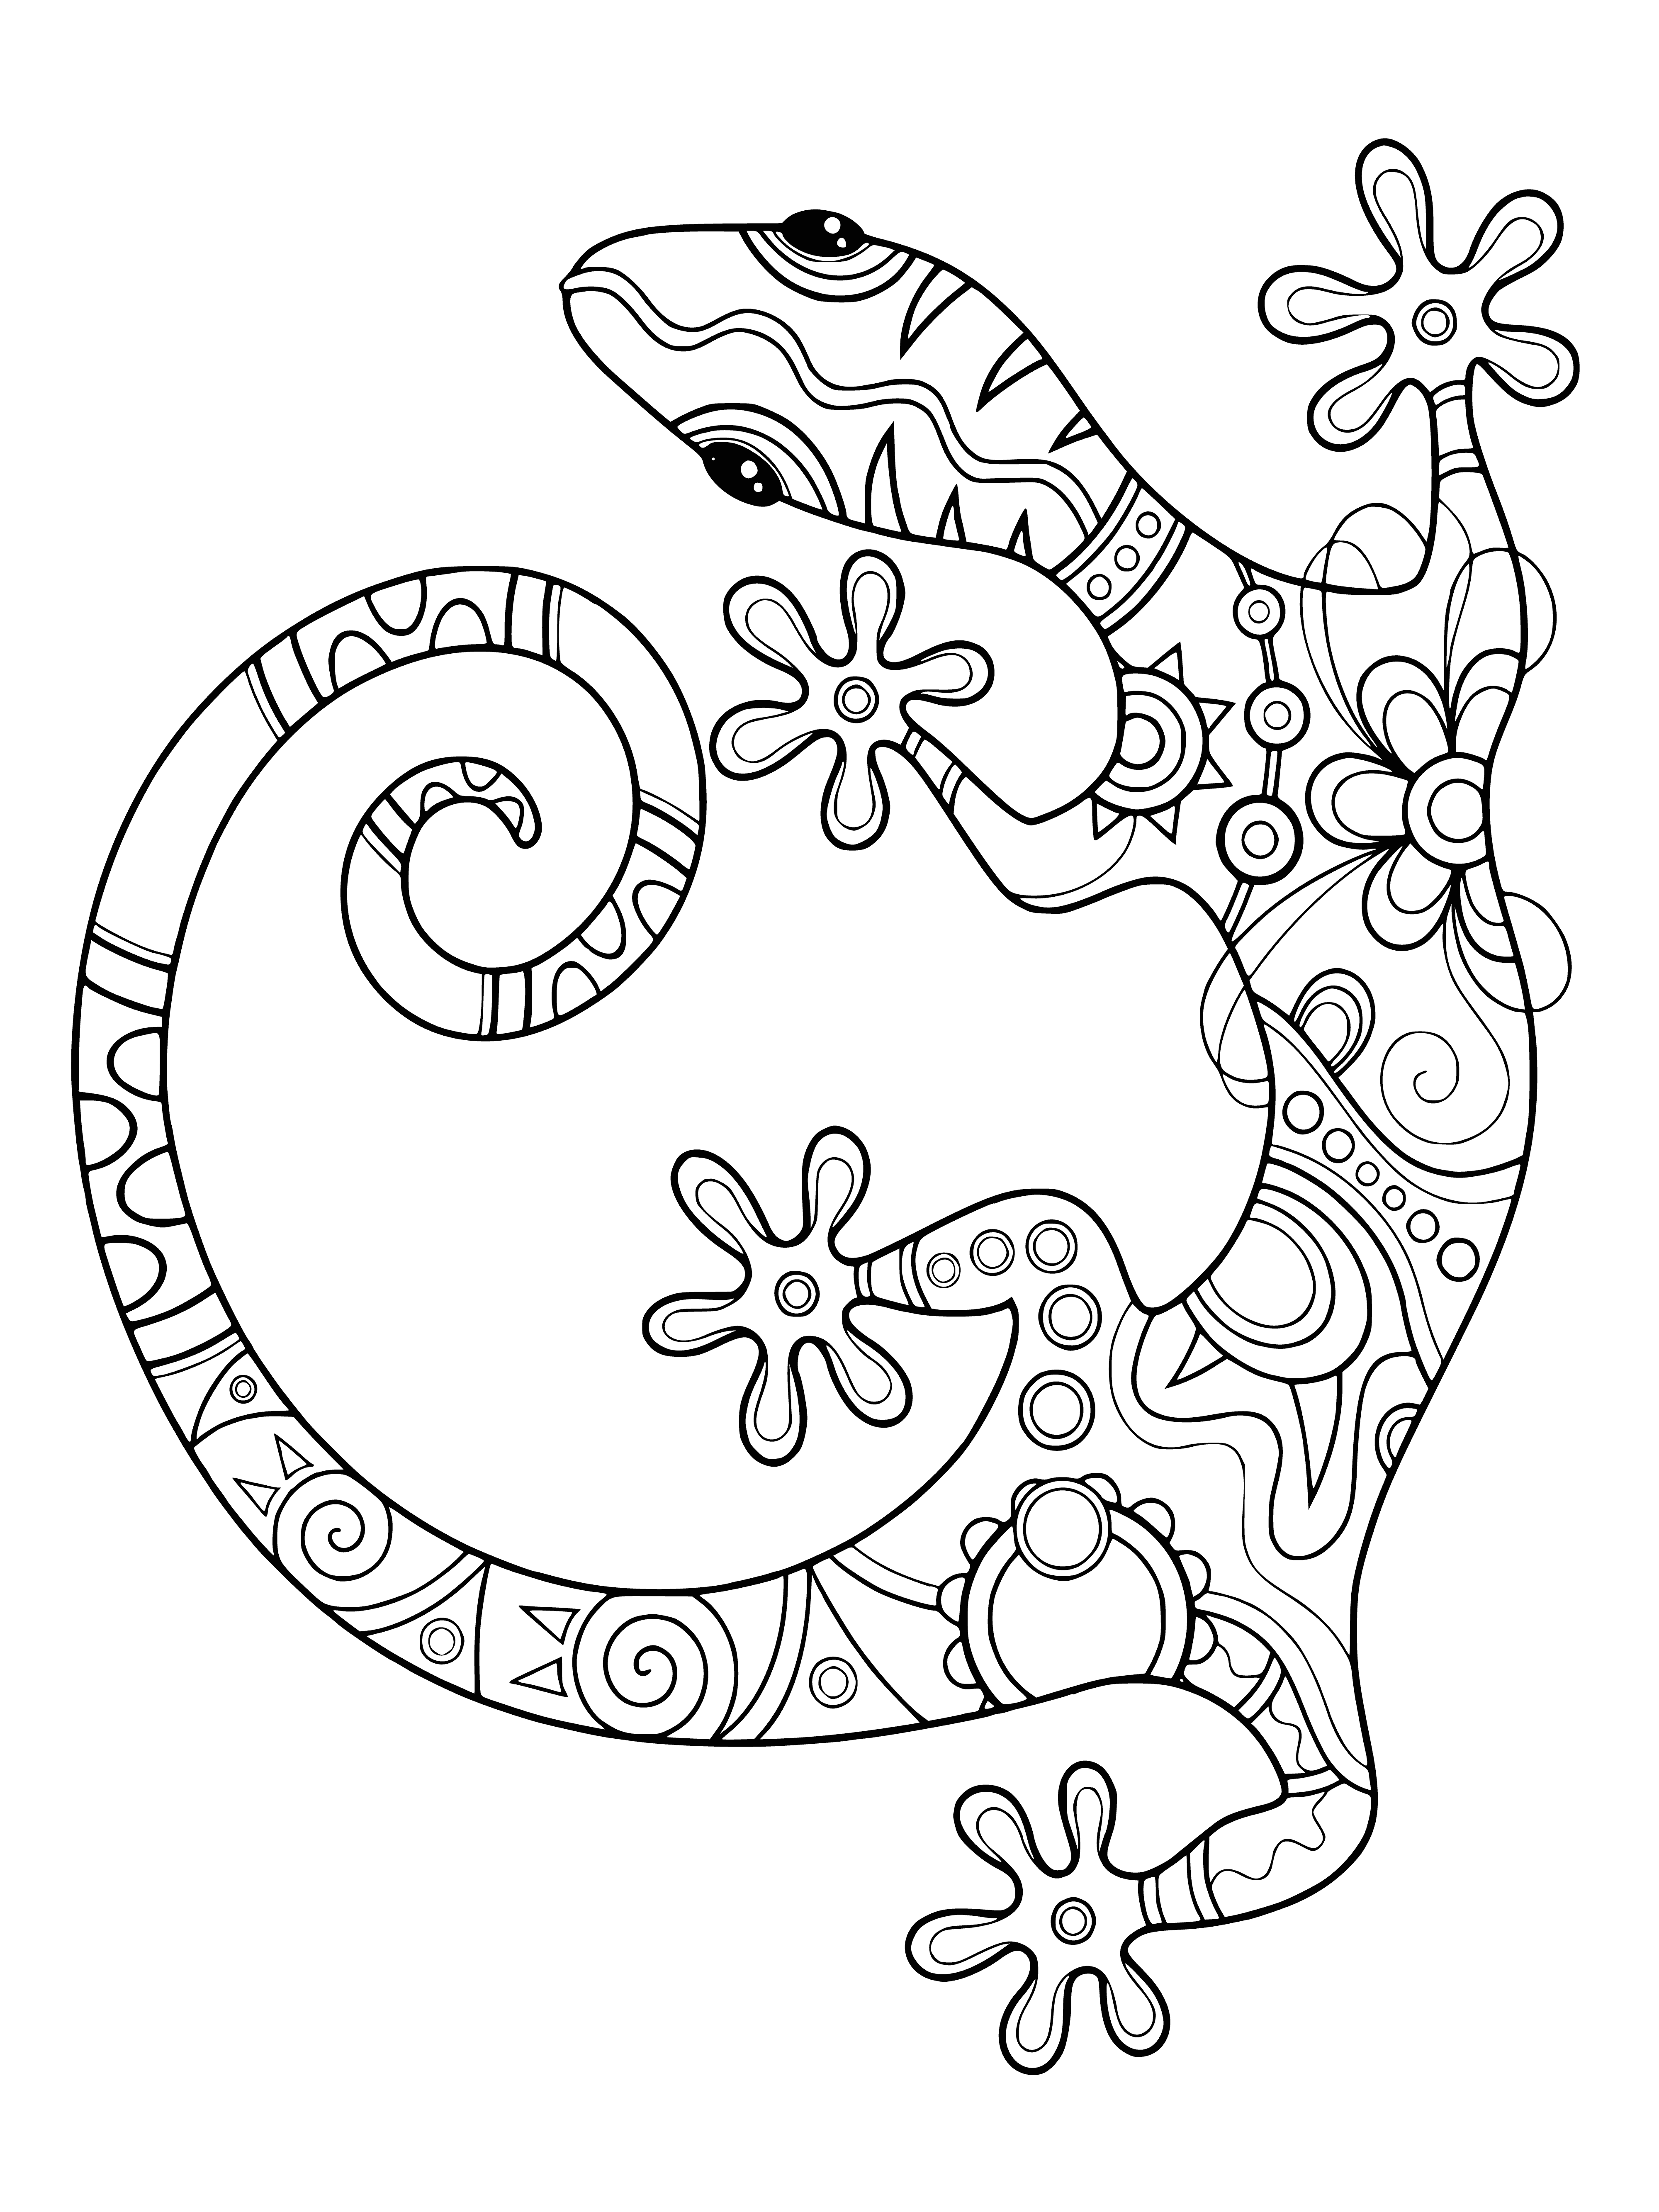 coloring page: Green lizard with long tail standing on a rock, ready to be colored.